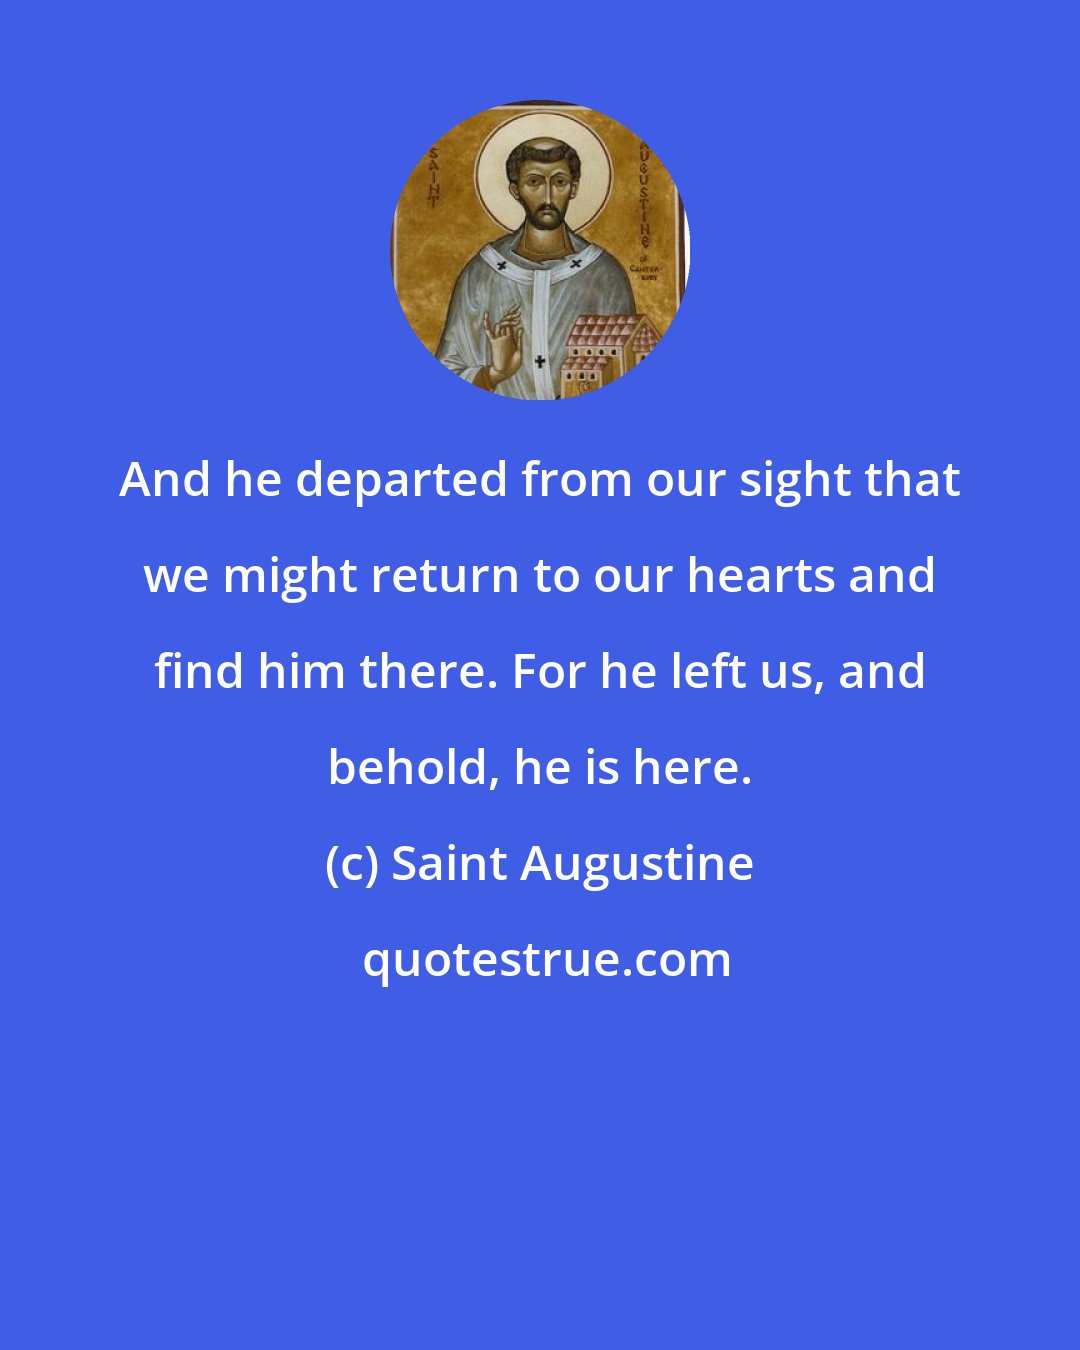 Saint Augustine: And he departed from our sight that we might return to our hearts and find him there. For he left us, and behold, he is here.